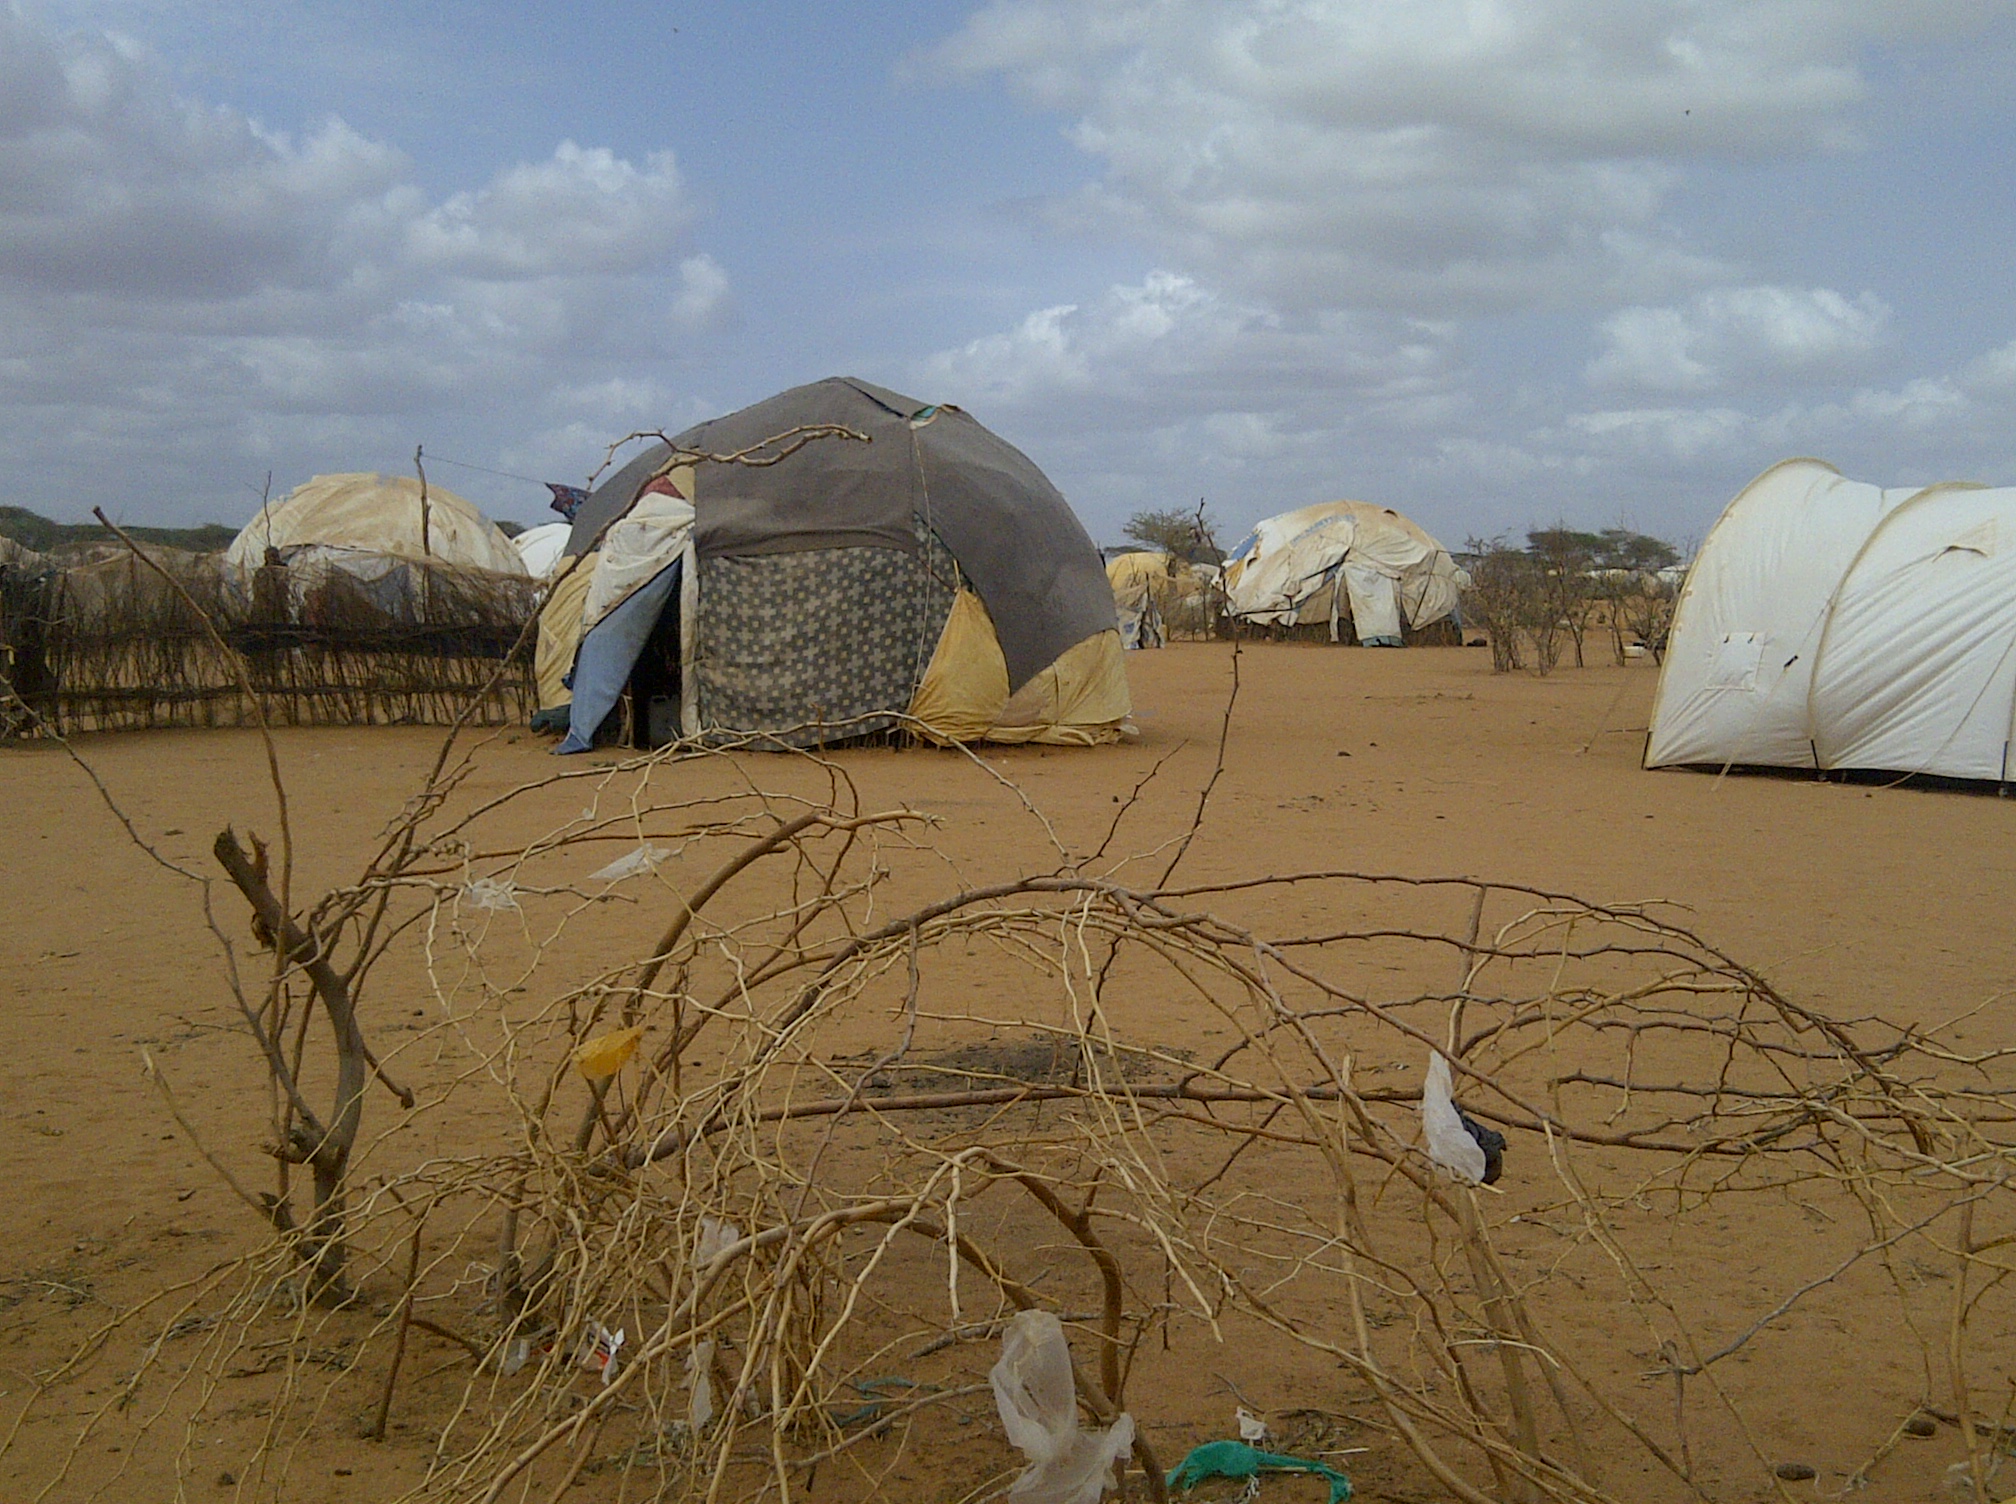 A desert-like area with several tents erected.